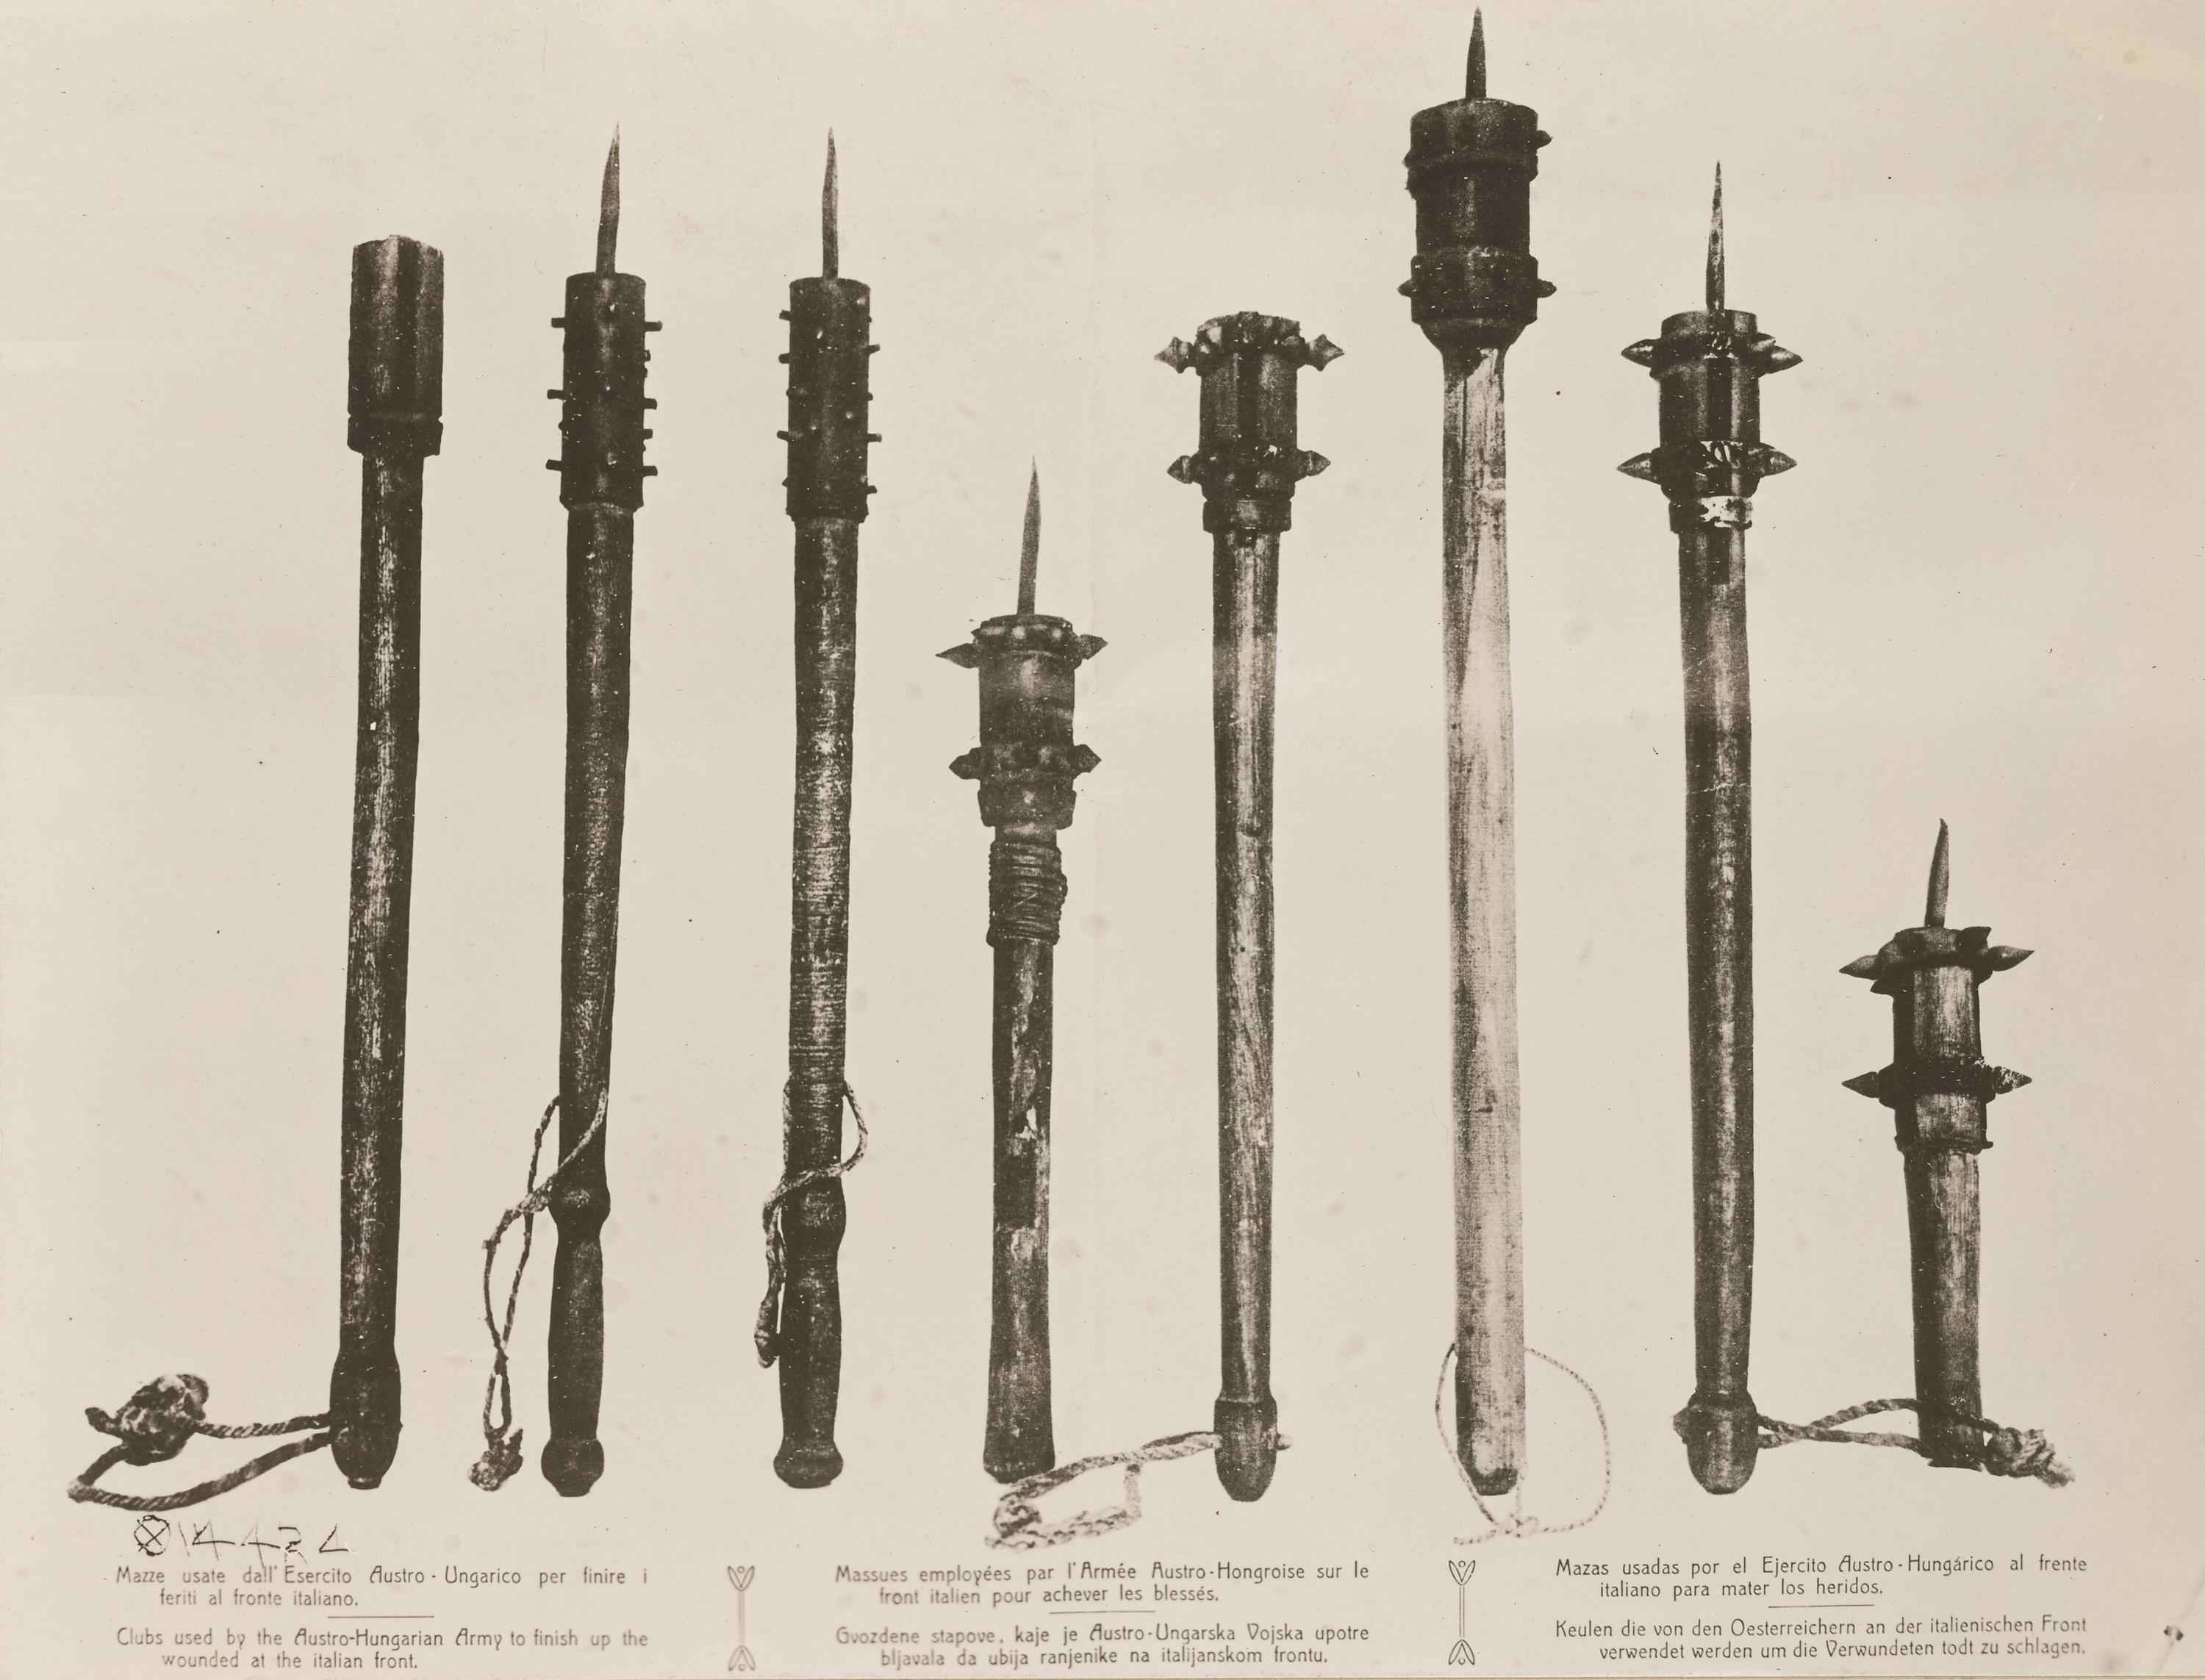 Medieval style maces and clubs used by Austro-Hungarian army during WW1, 1914-1918